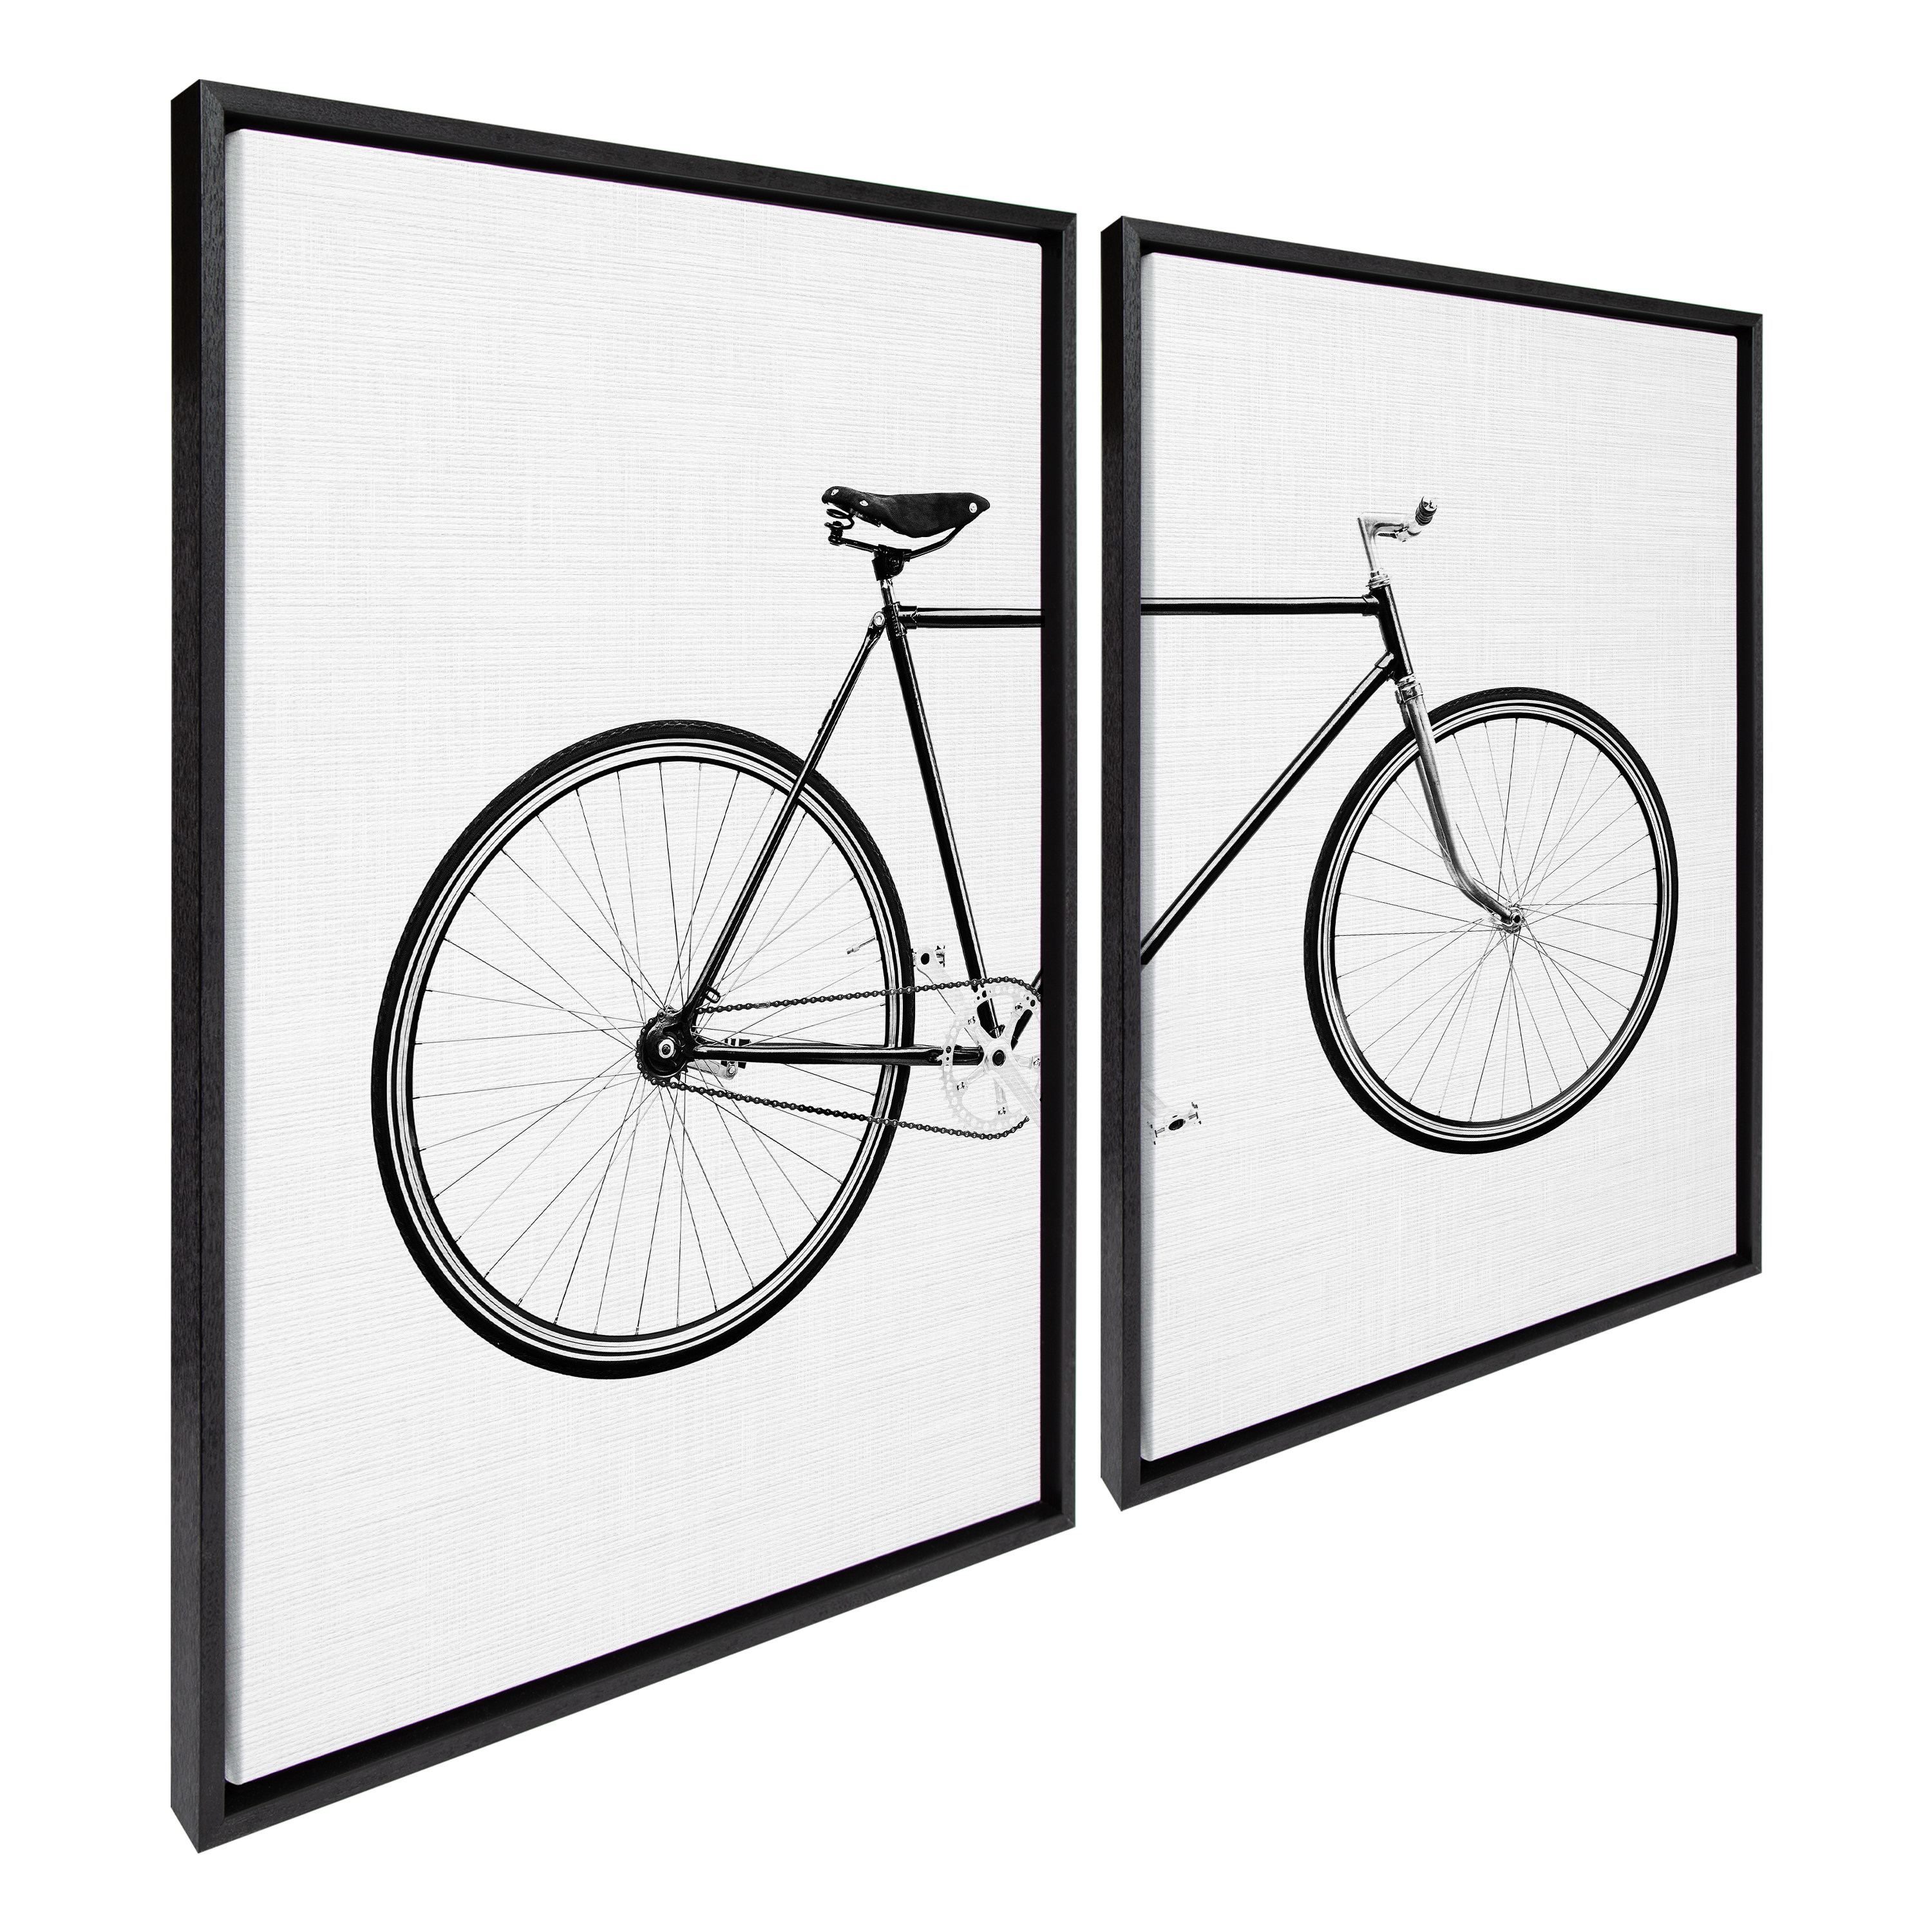 Kate and Laurel Sylvie Bicycle Framed Canvas Wall Art by SImon Te of Tai  Prints, Set of 2, 23x33 Black, Whimsical Wall Decor